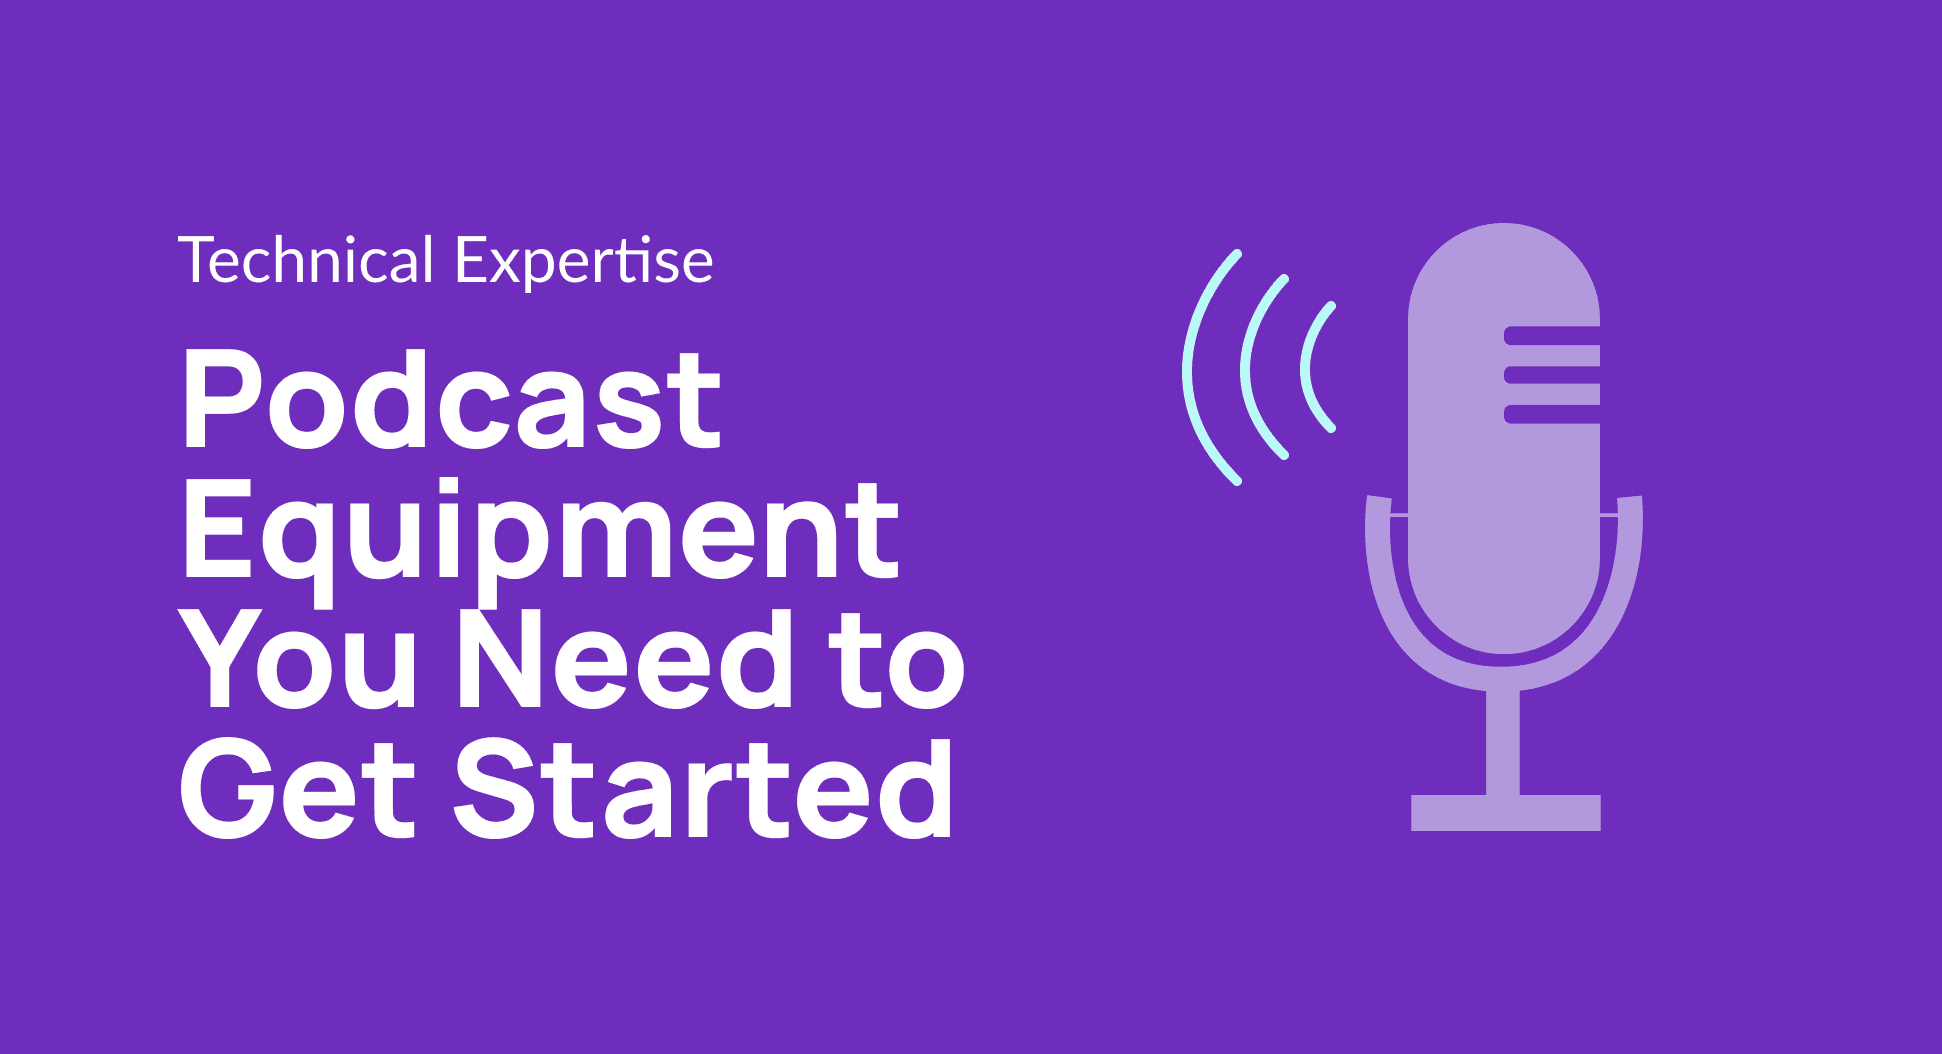 Product Podcast Equipment You Need to Get Started image